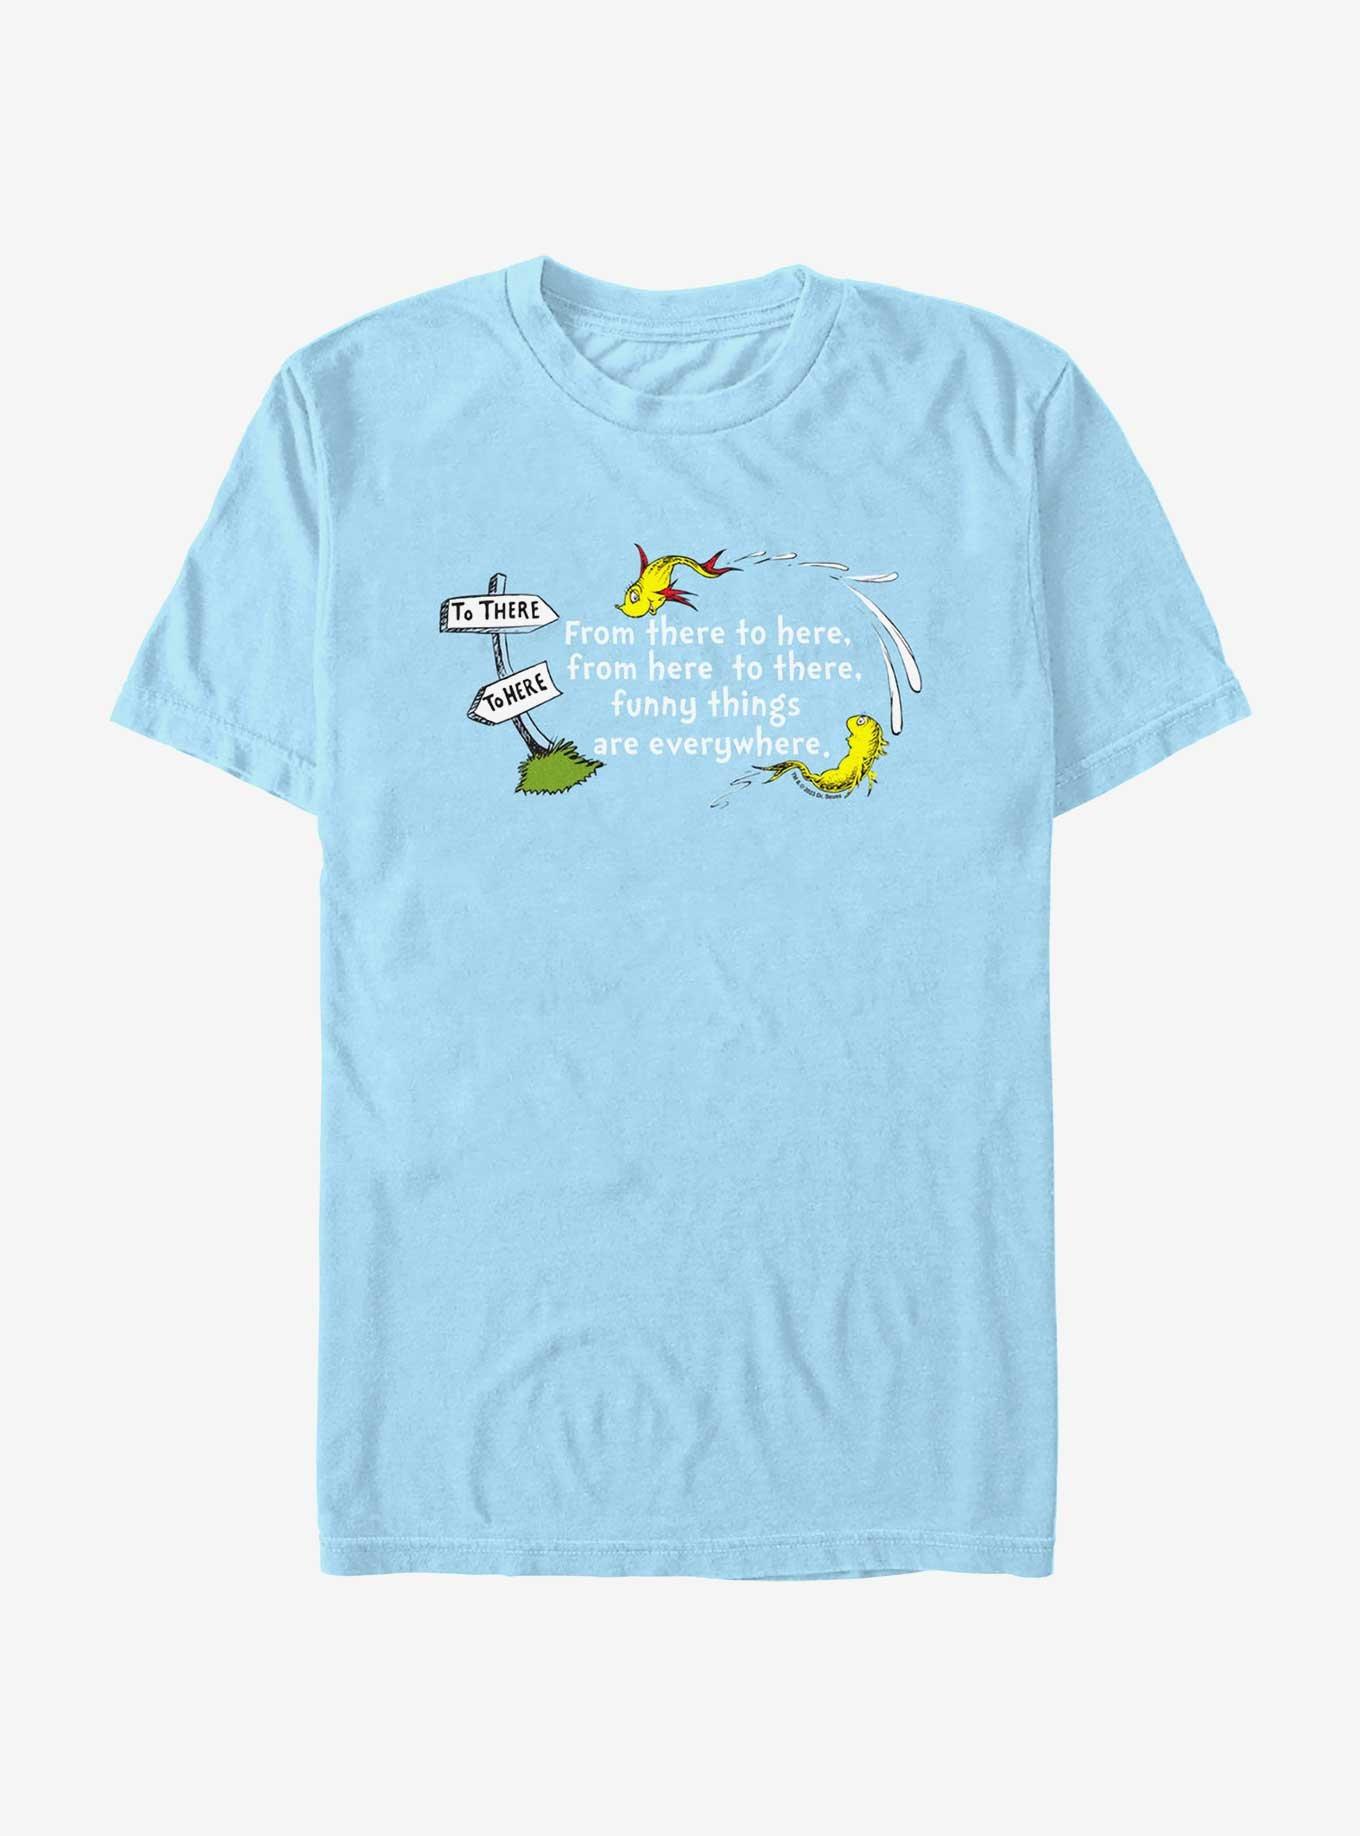 Dr. Seuss From Here To Everywhere T-Shirt, LT BLUE, hi-res